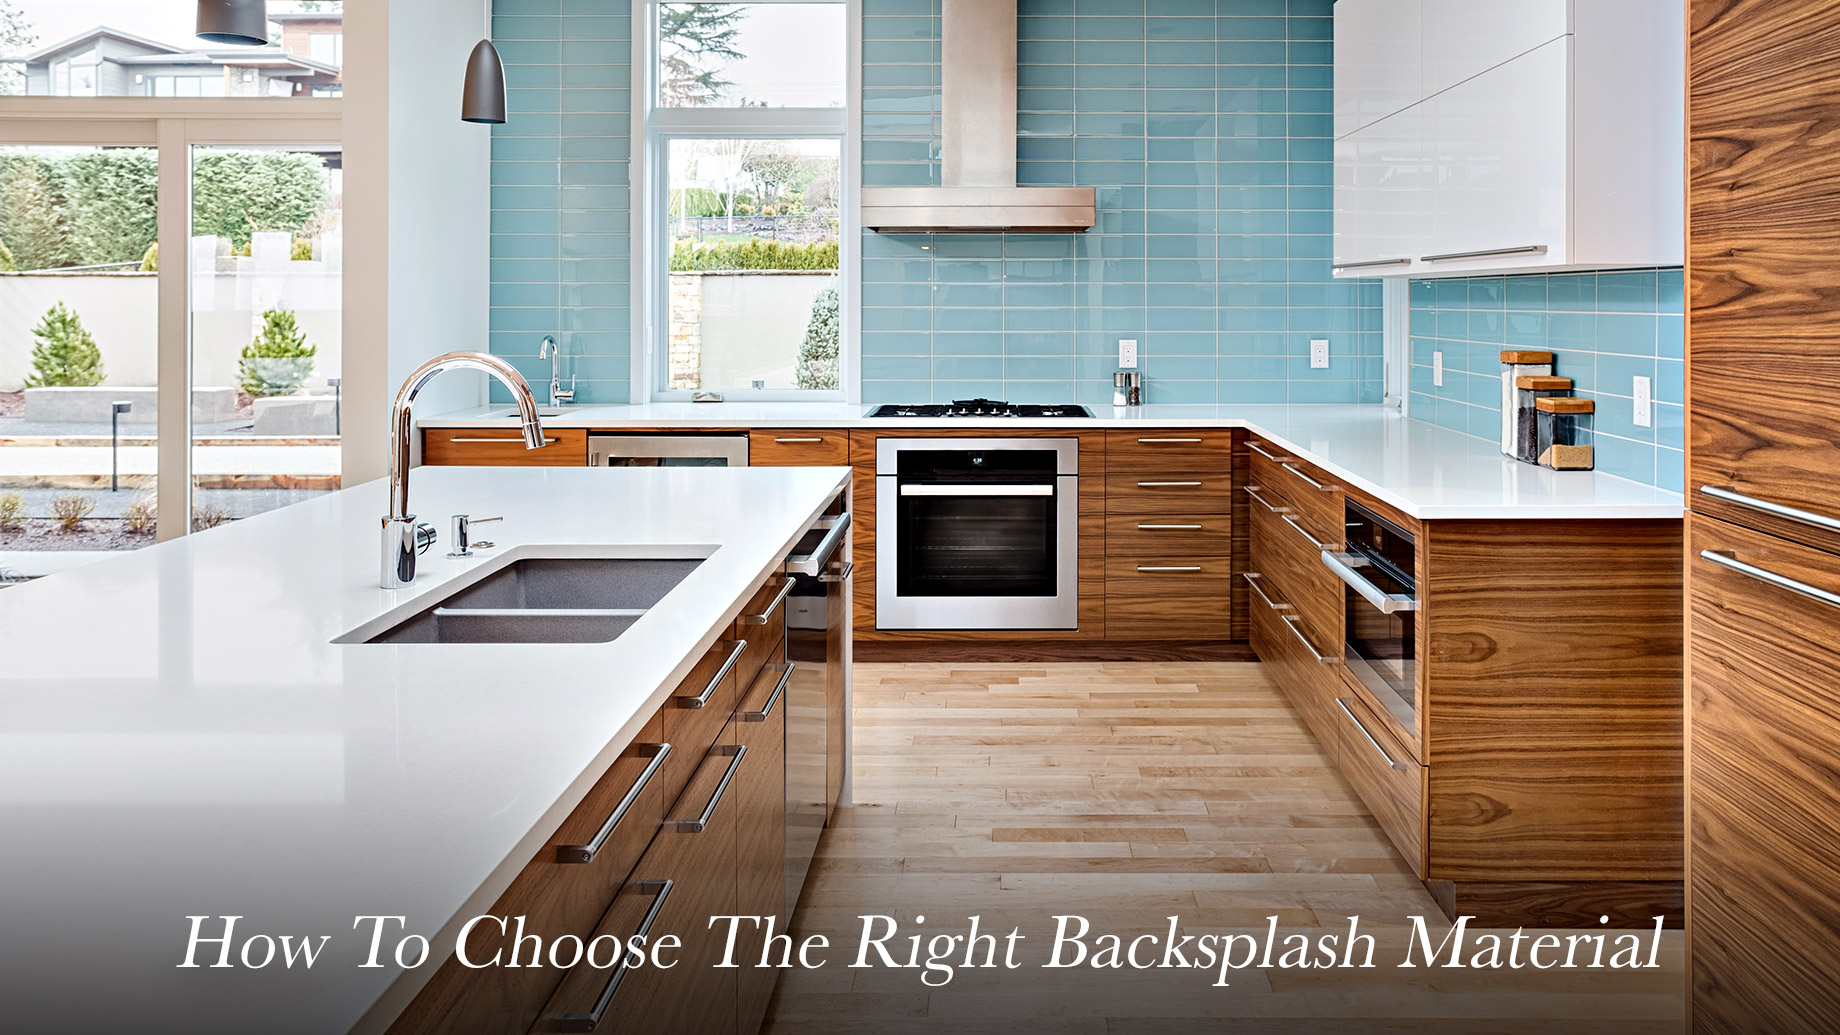 How To Choose The Right Backsplash Material